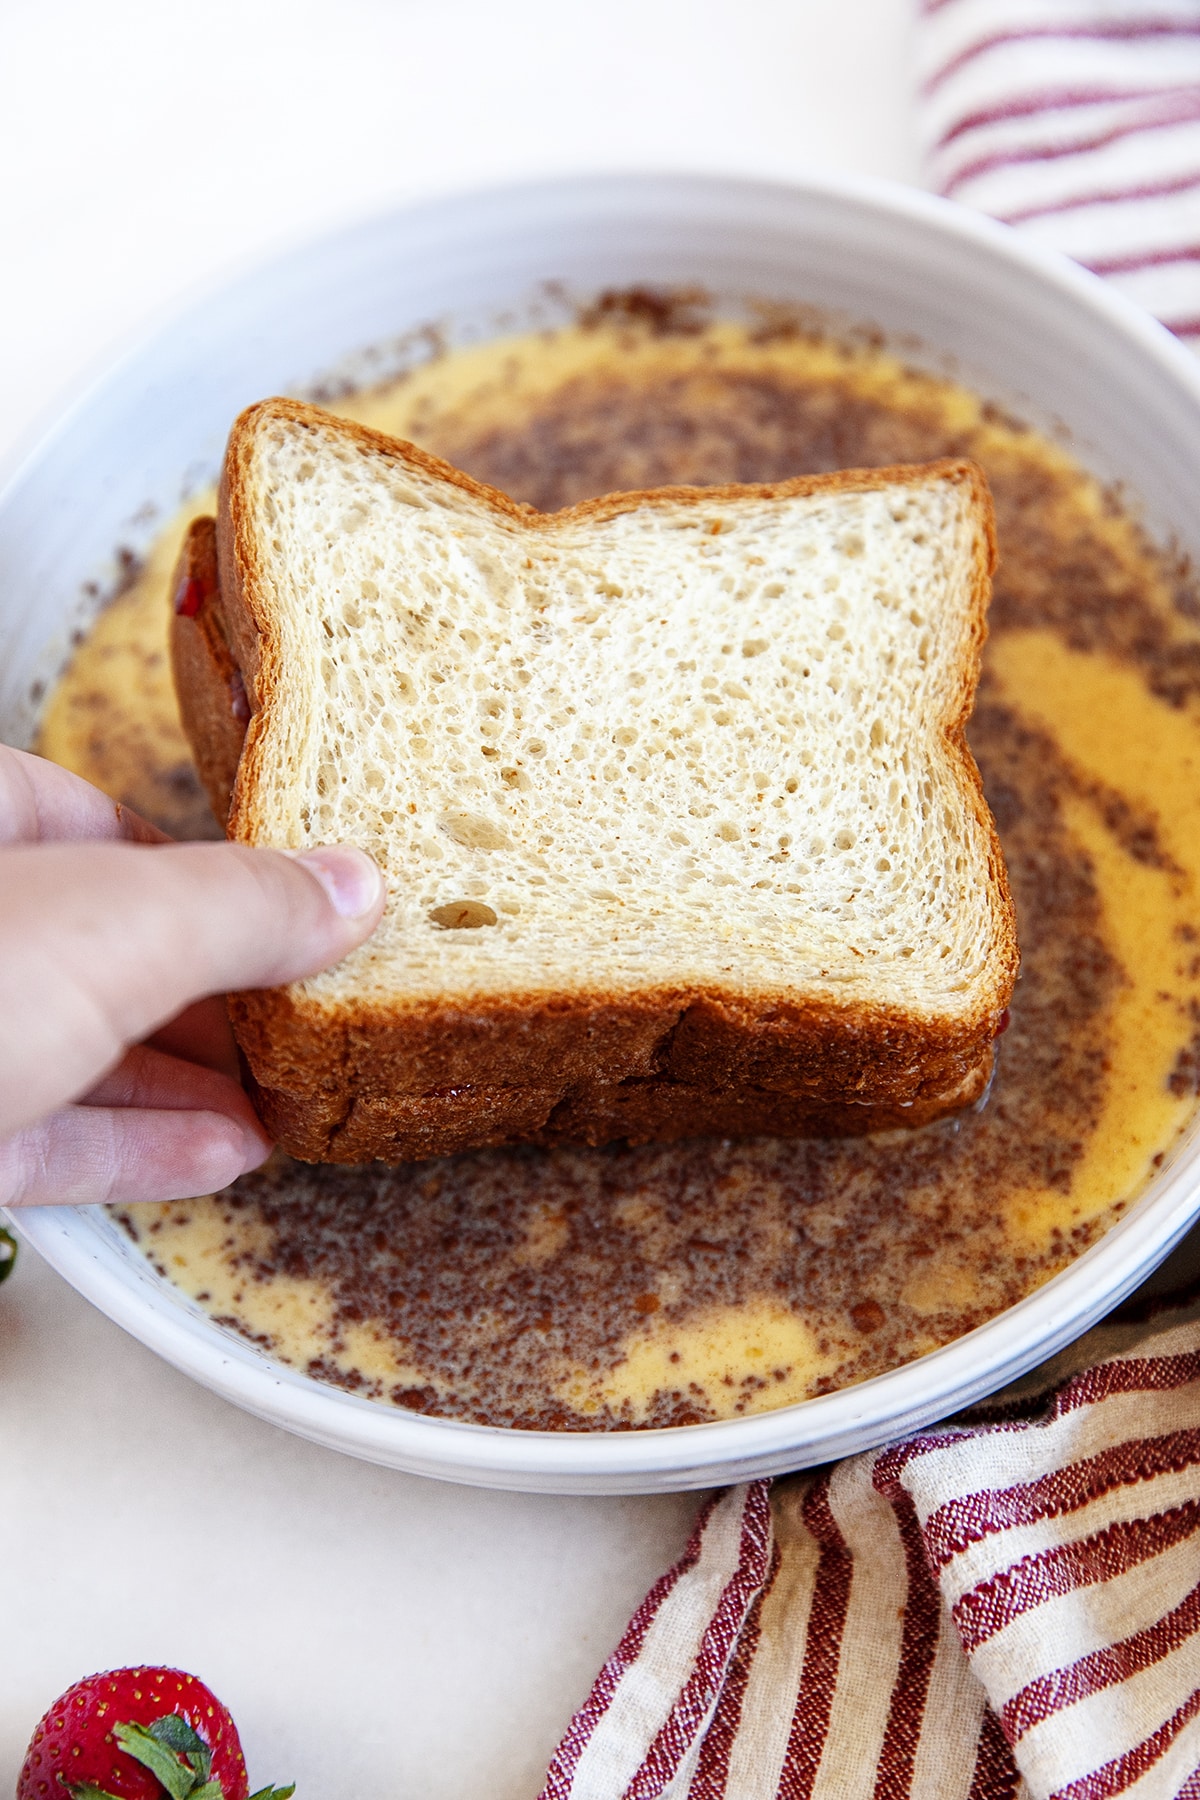 Dipping stuffed French toast in an egg mixture. 